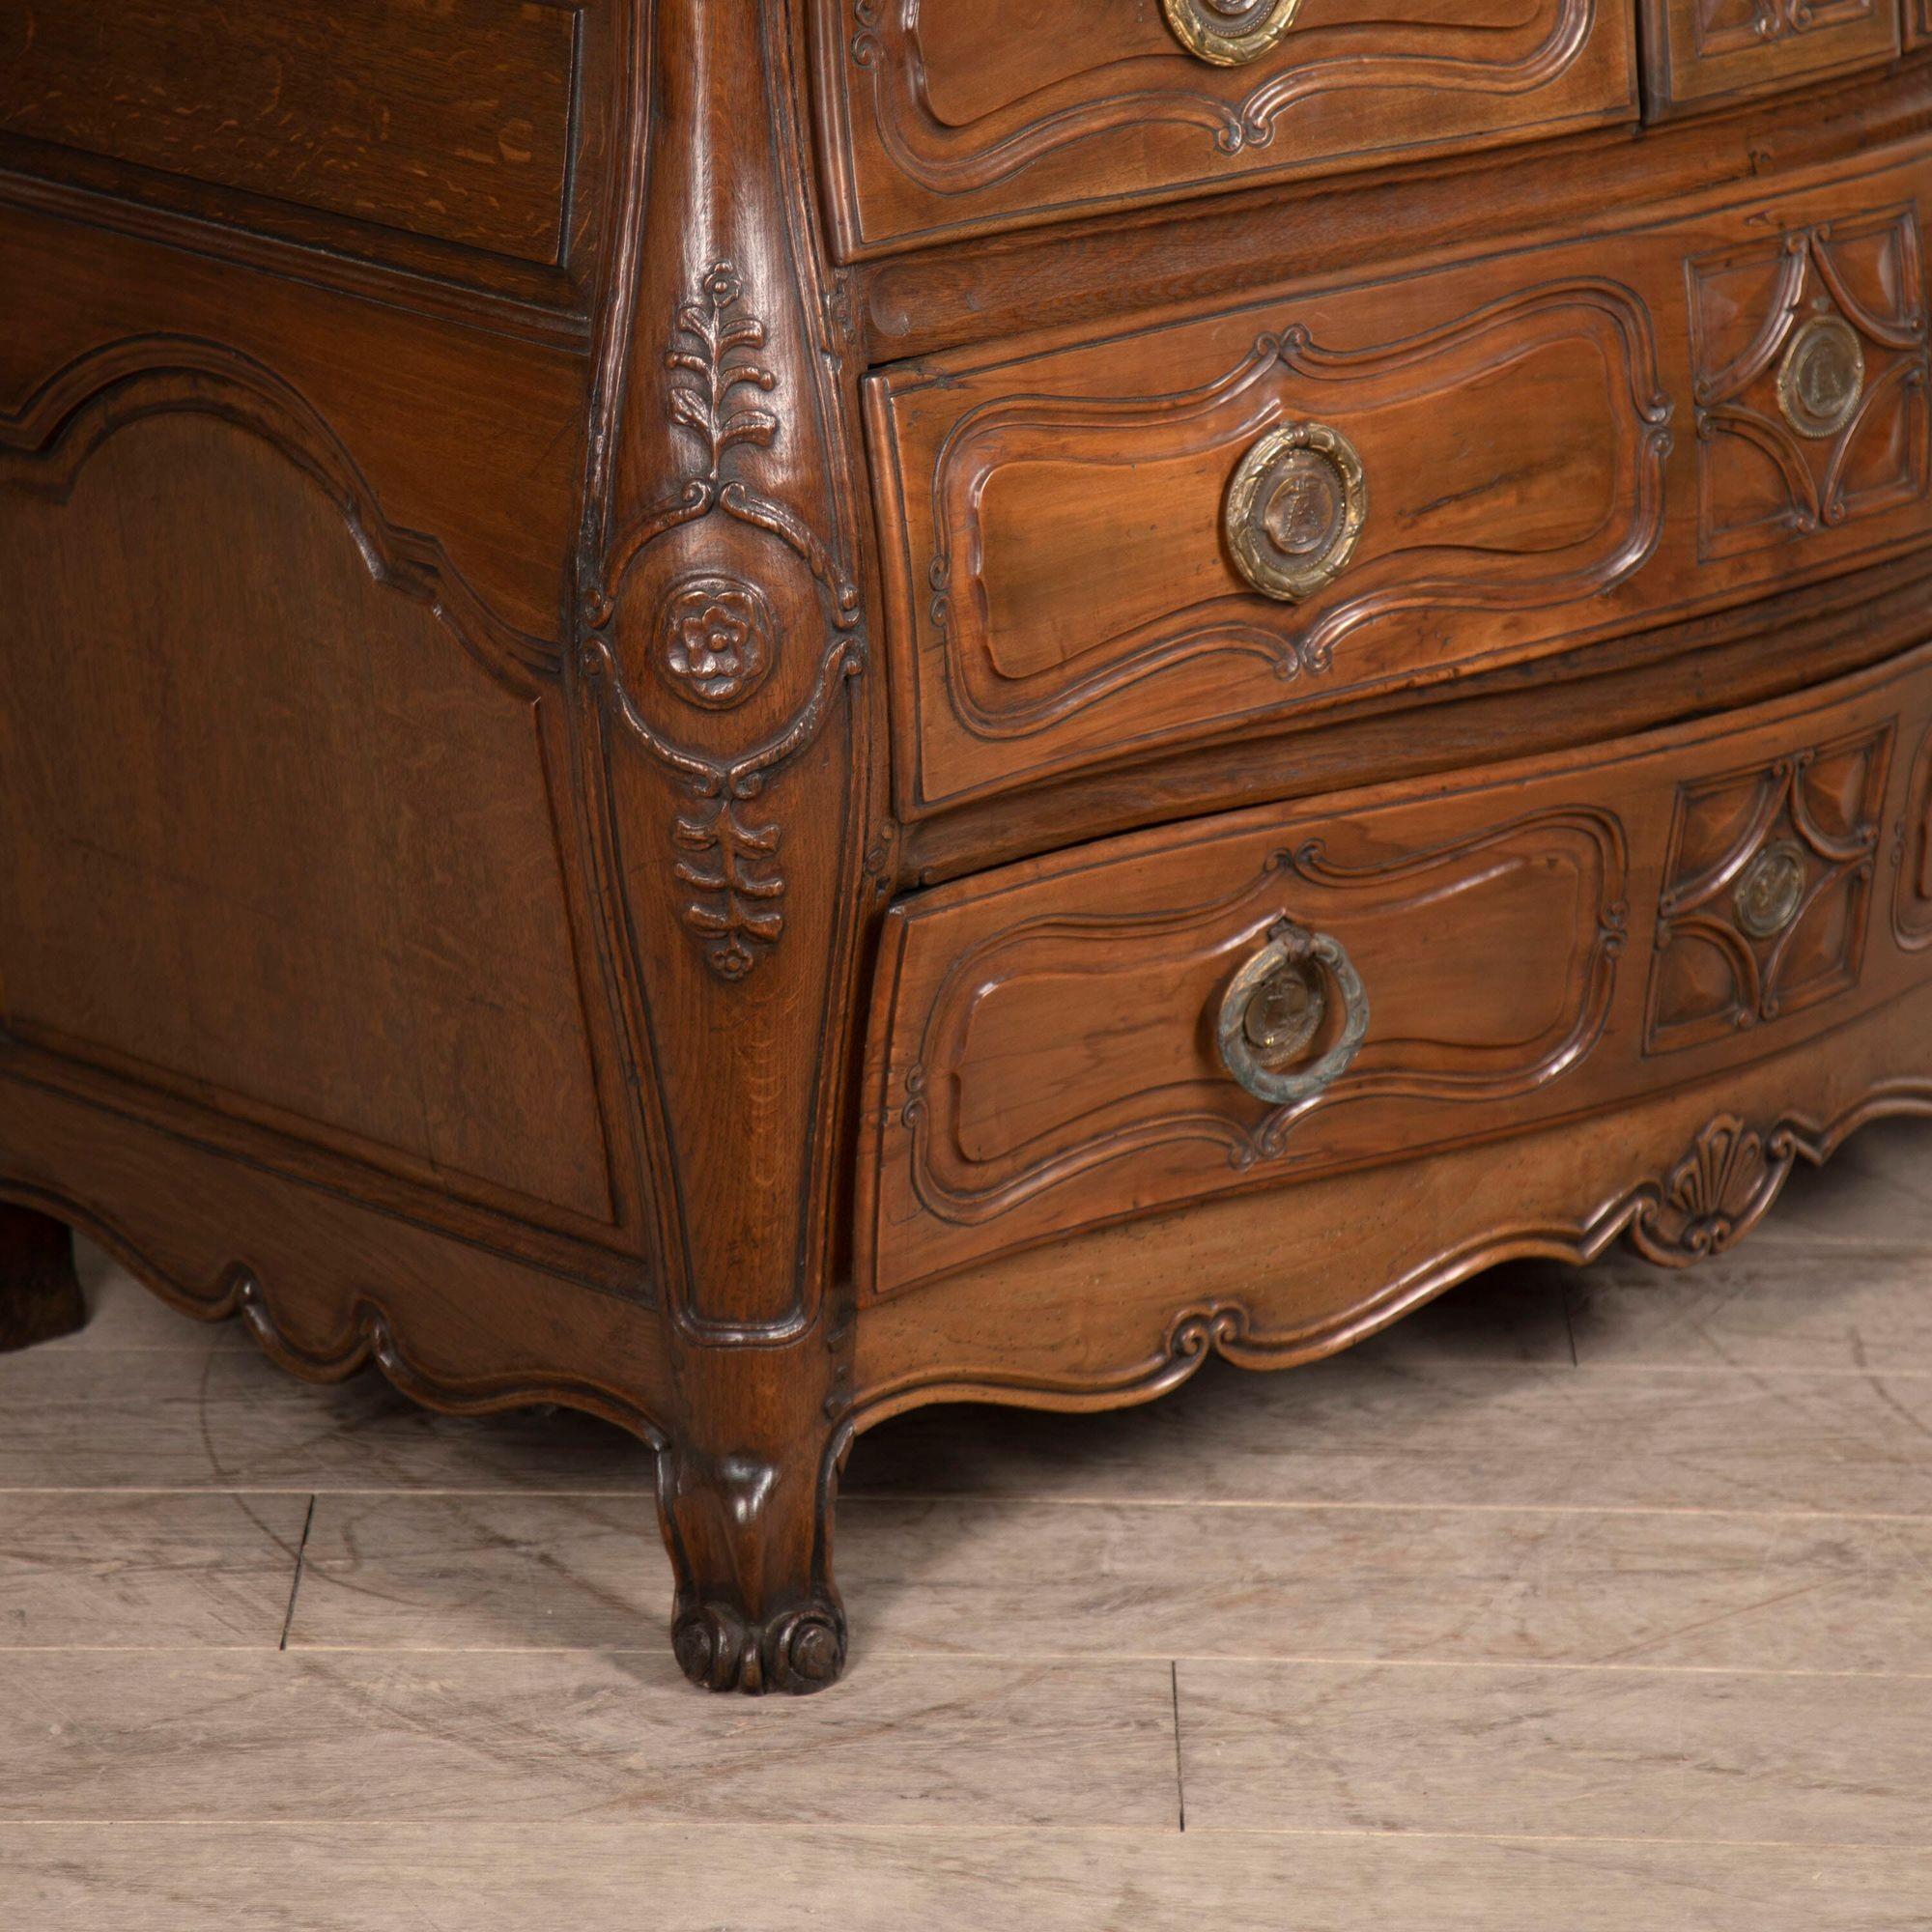 18th century French commode.
A fine quality Louis XV period walnut commode of most attractive colour.
Of bombe form consisting of three short drawers over two long drawers with a shell-centred carved scroll apron supported on short scroll feet.